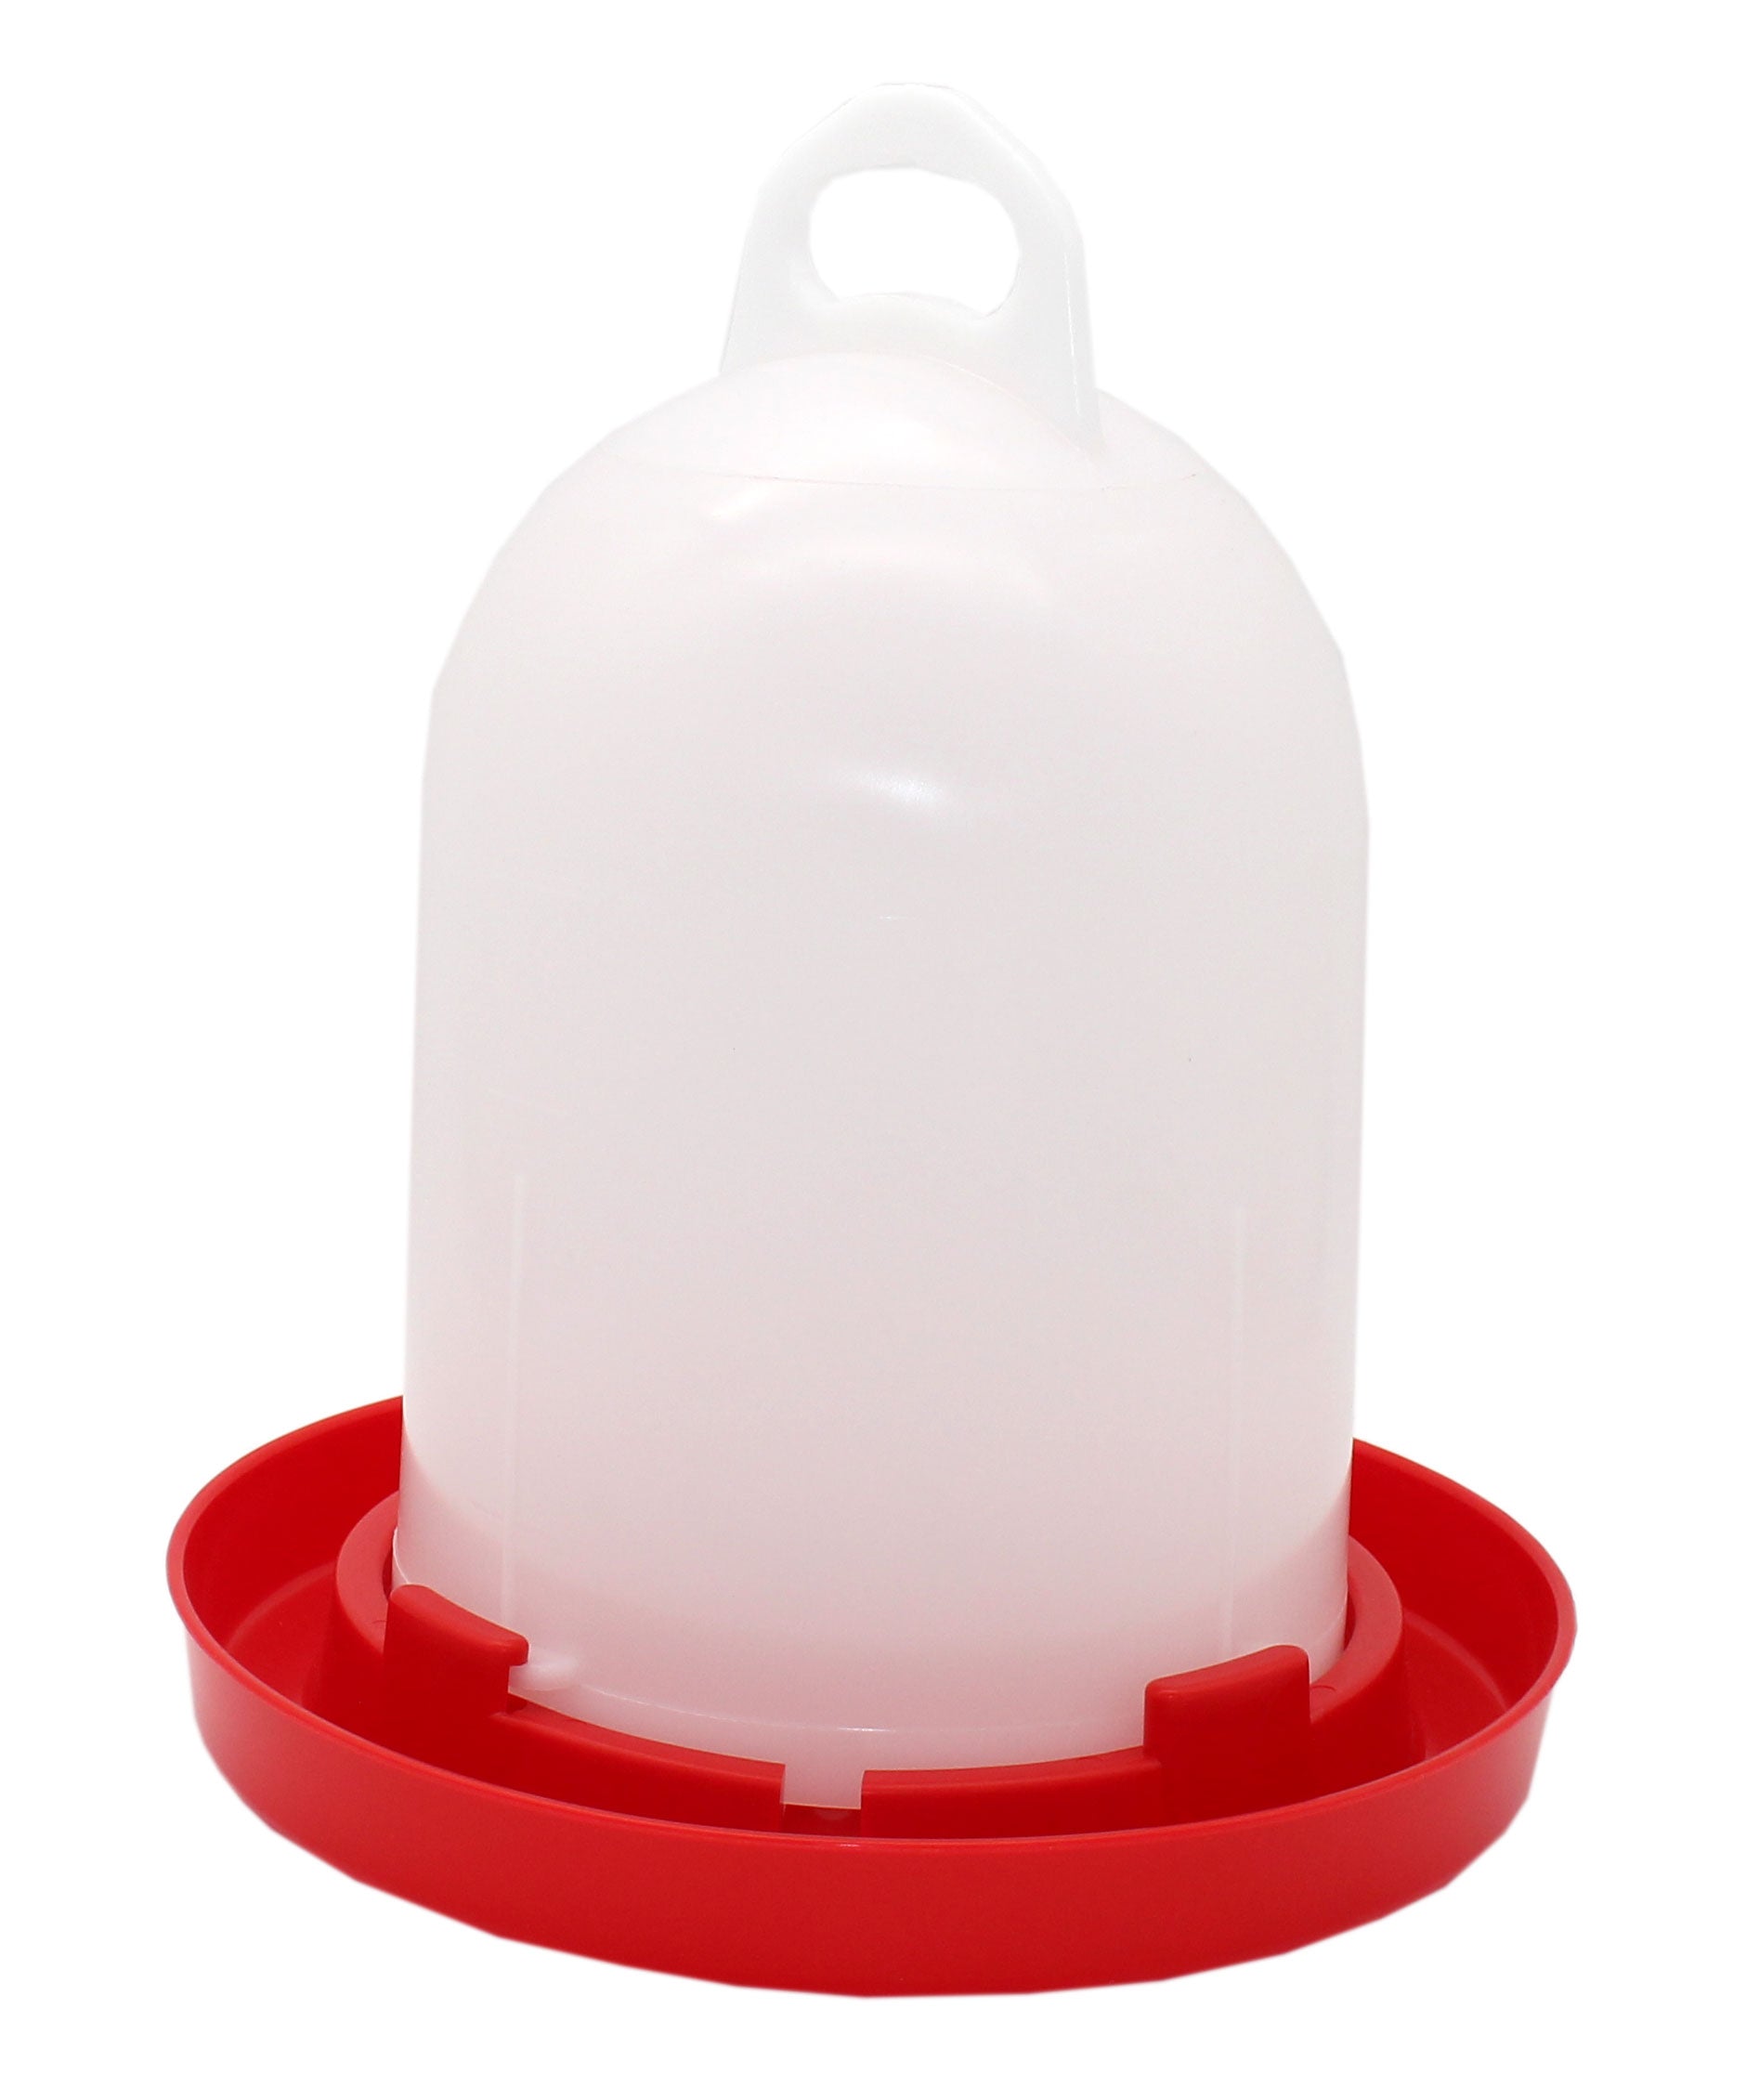 Drinker for Poultry with Bayonet-Lock, plastic, optional with Legs (1,5l - 3,5l - 5,5l)